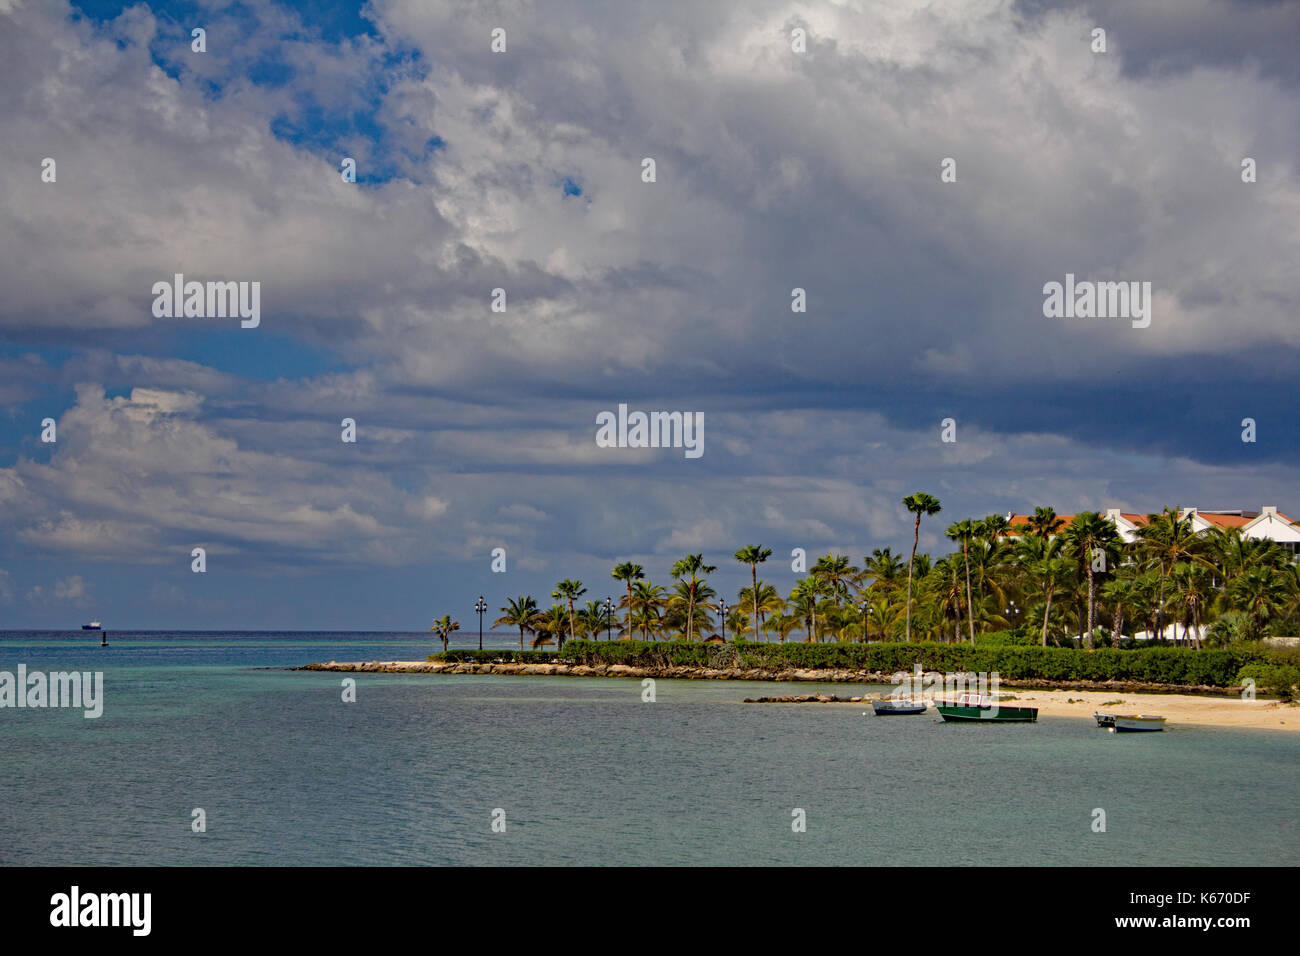 Beautiful view of the bay in Aruba.  Boats along the shore, palm trees and sunny blue skies. Stock Photo